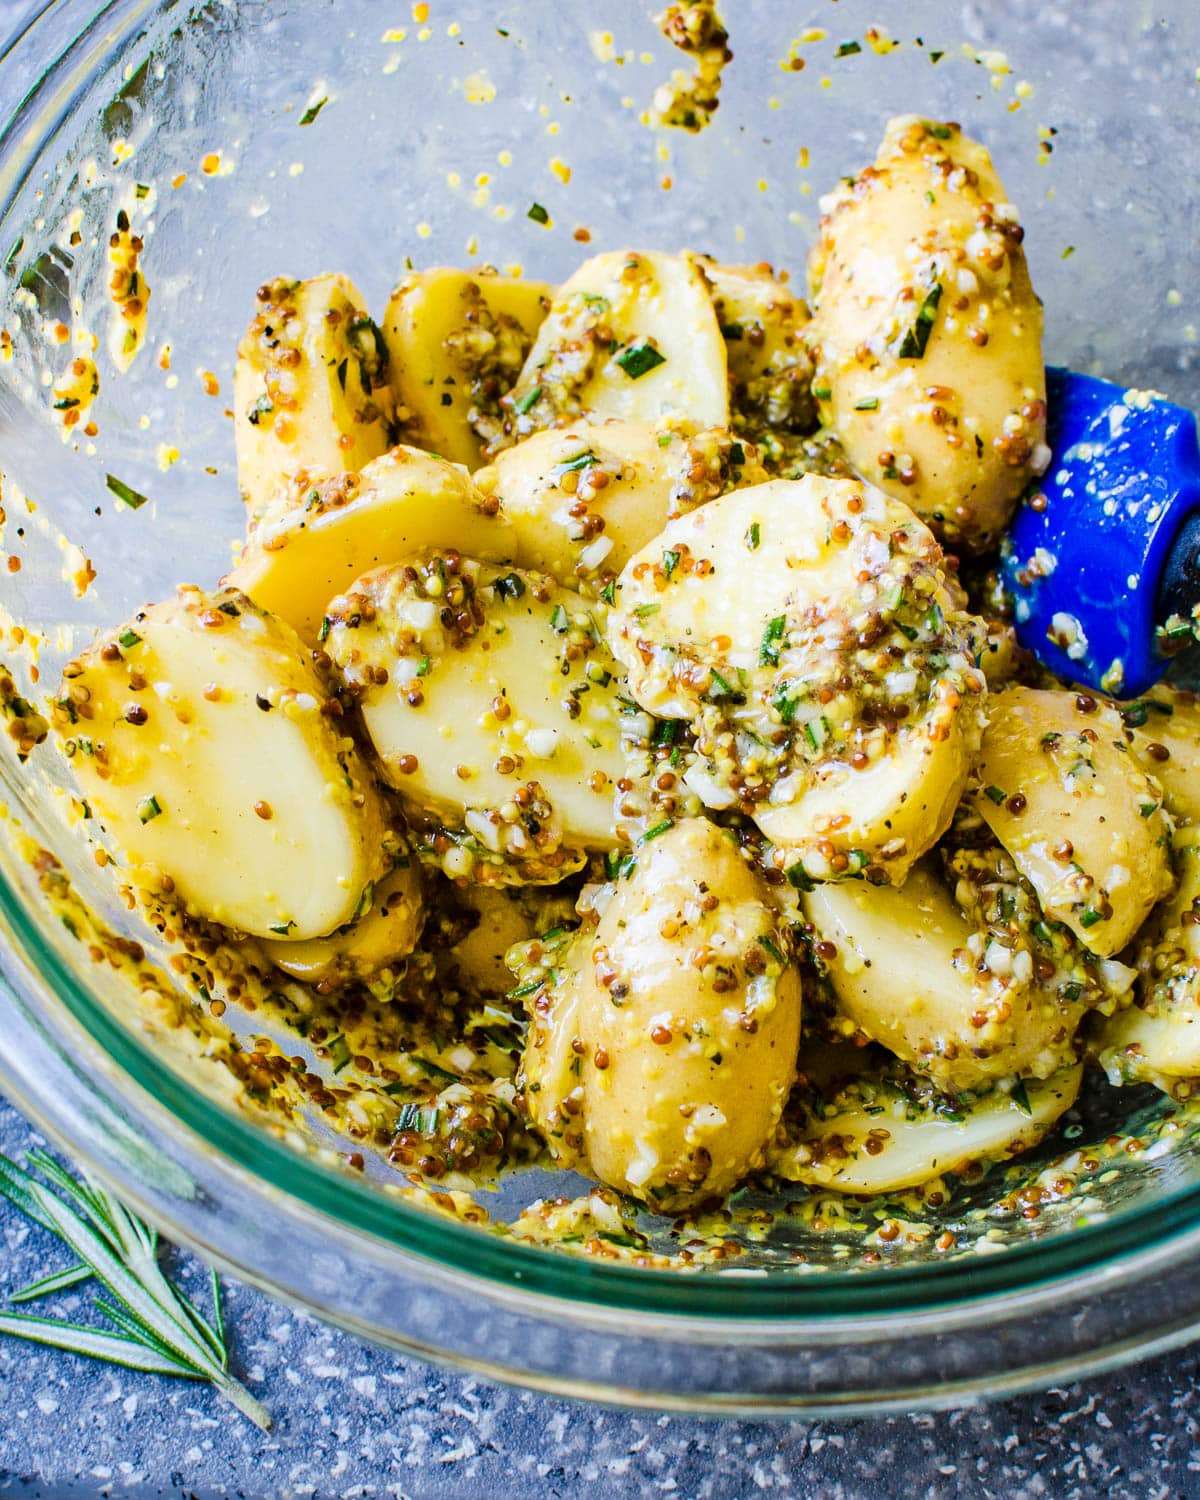 Mustard-Crusted Roast New Potatoes With Shallots and Garlic Recipe 